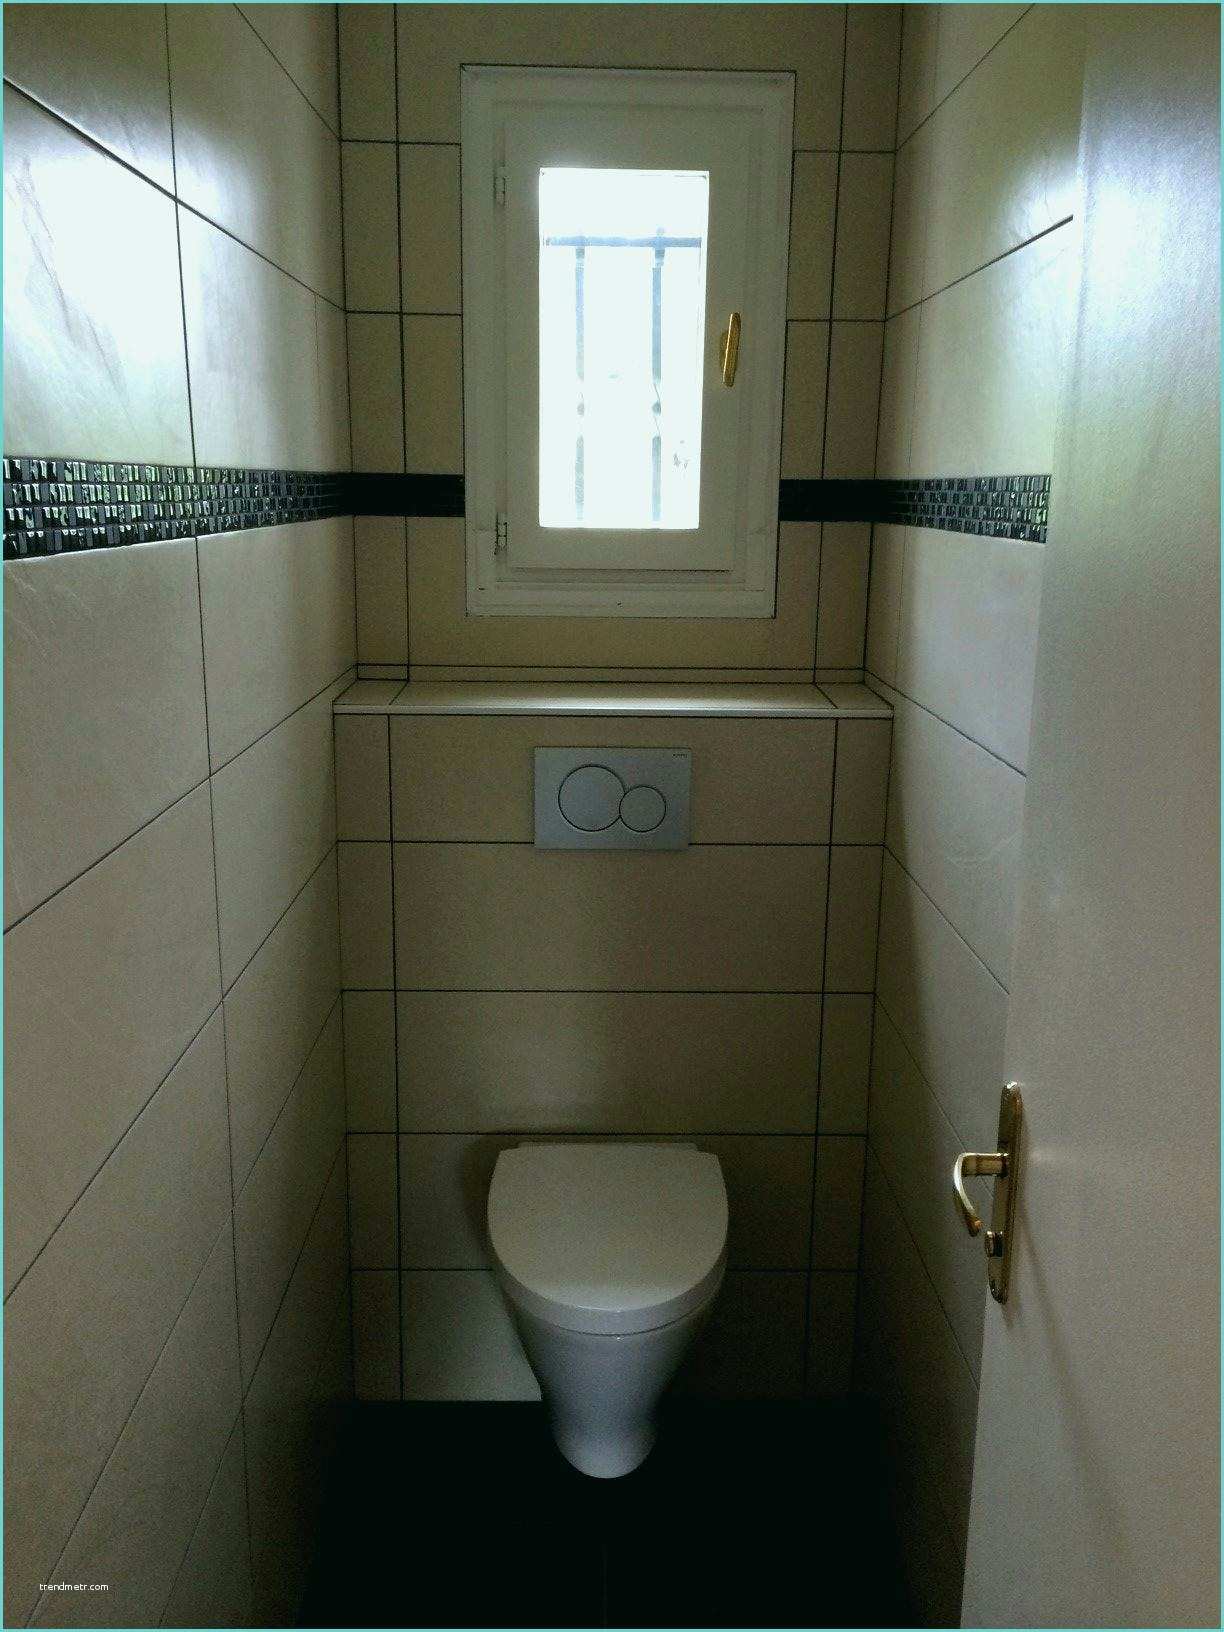 Carrelage Wc Moderne Carrelage Wc Moderne Download by with Carrelage toilette